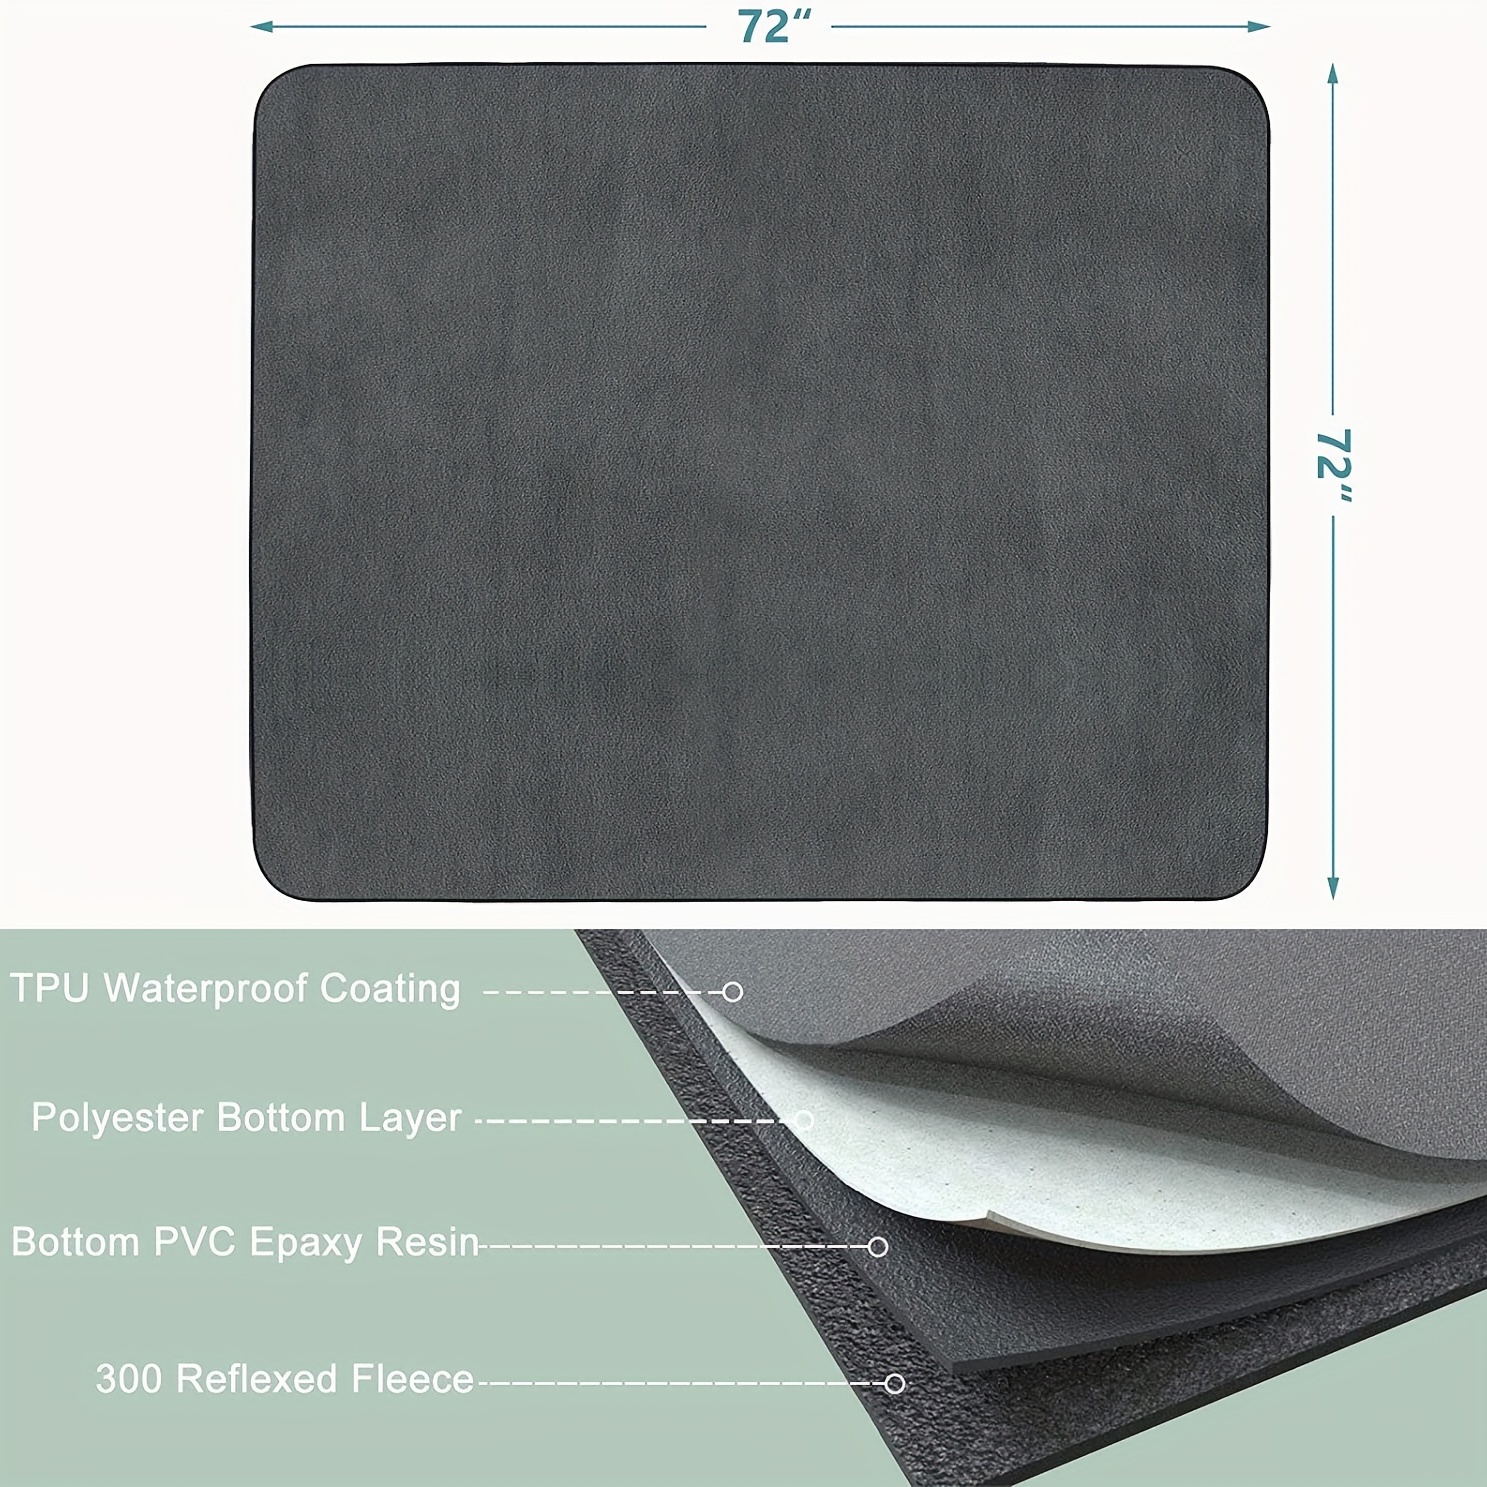 Large Washable Waterproof Bed Pad - Washable 300x for Reusable